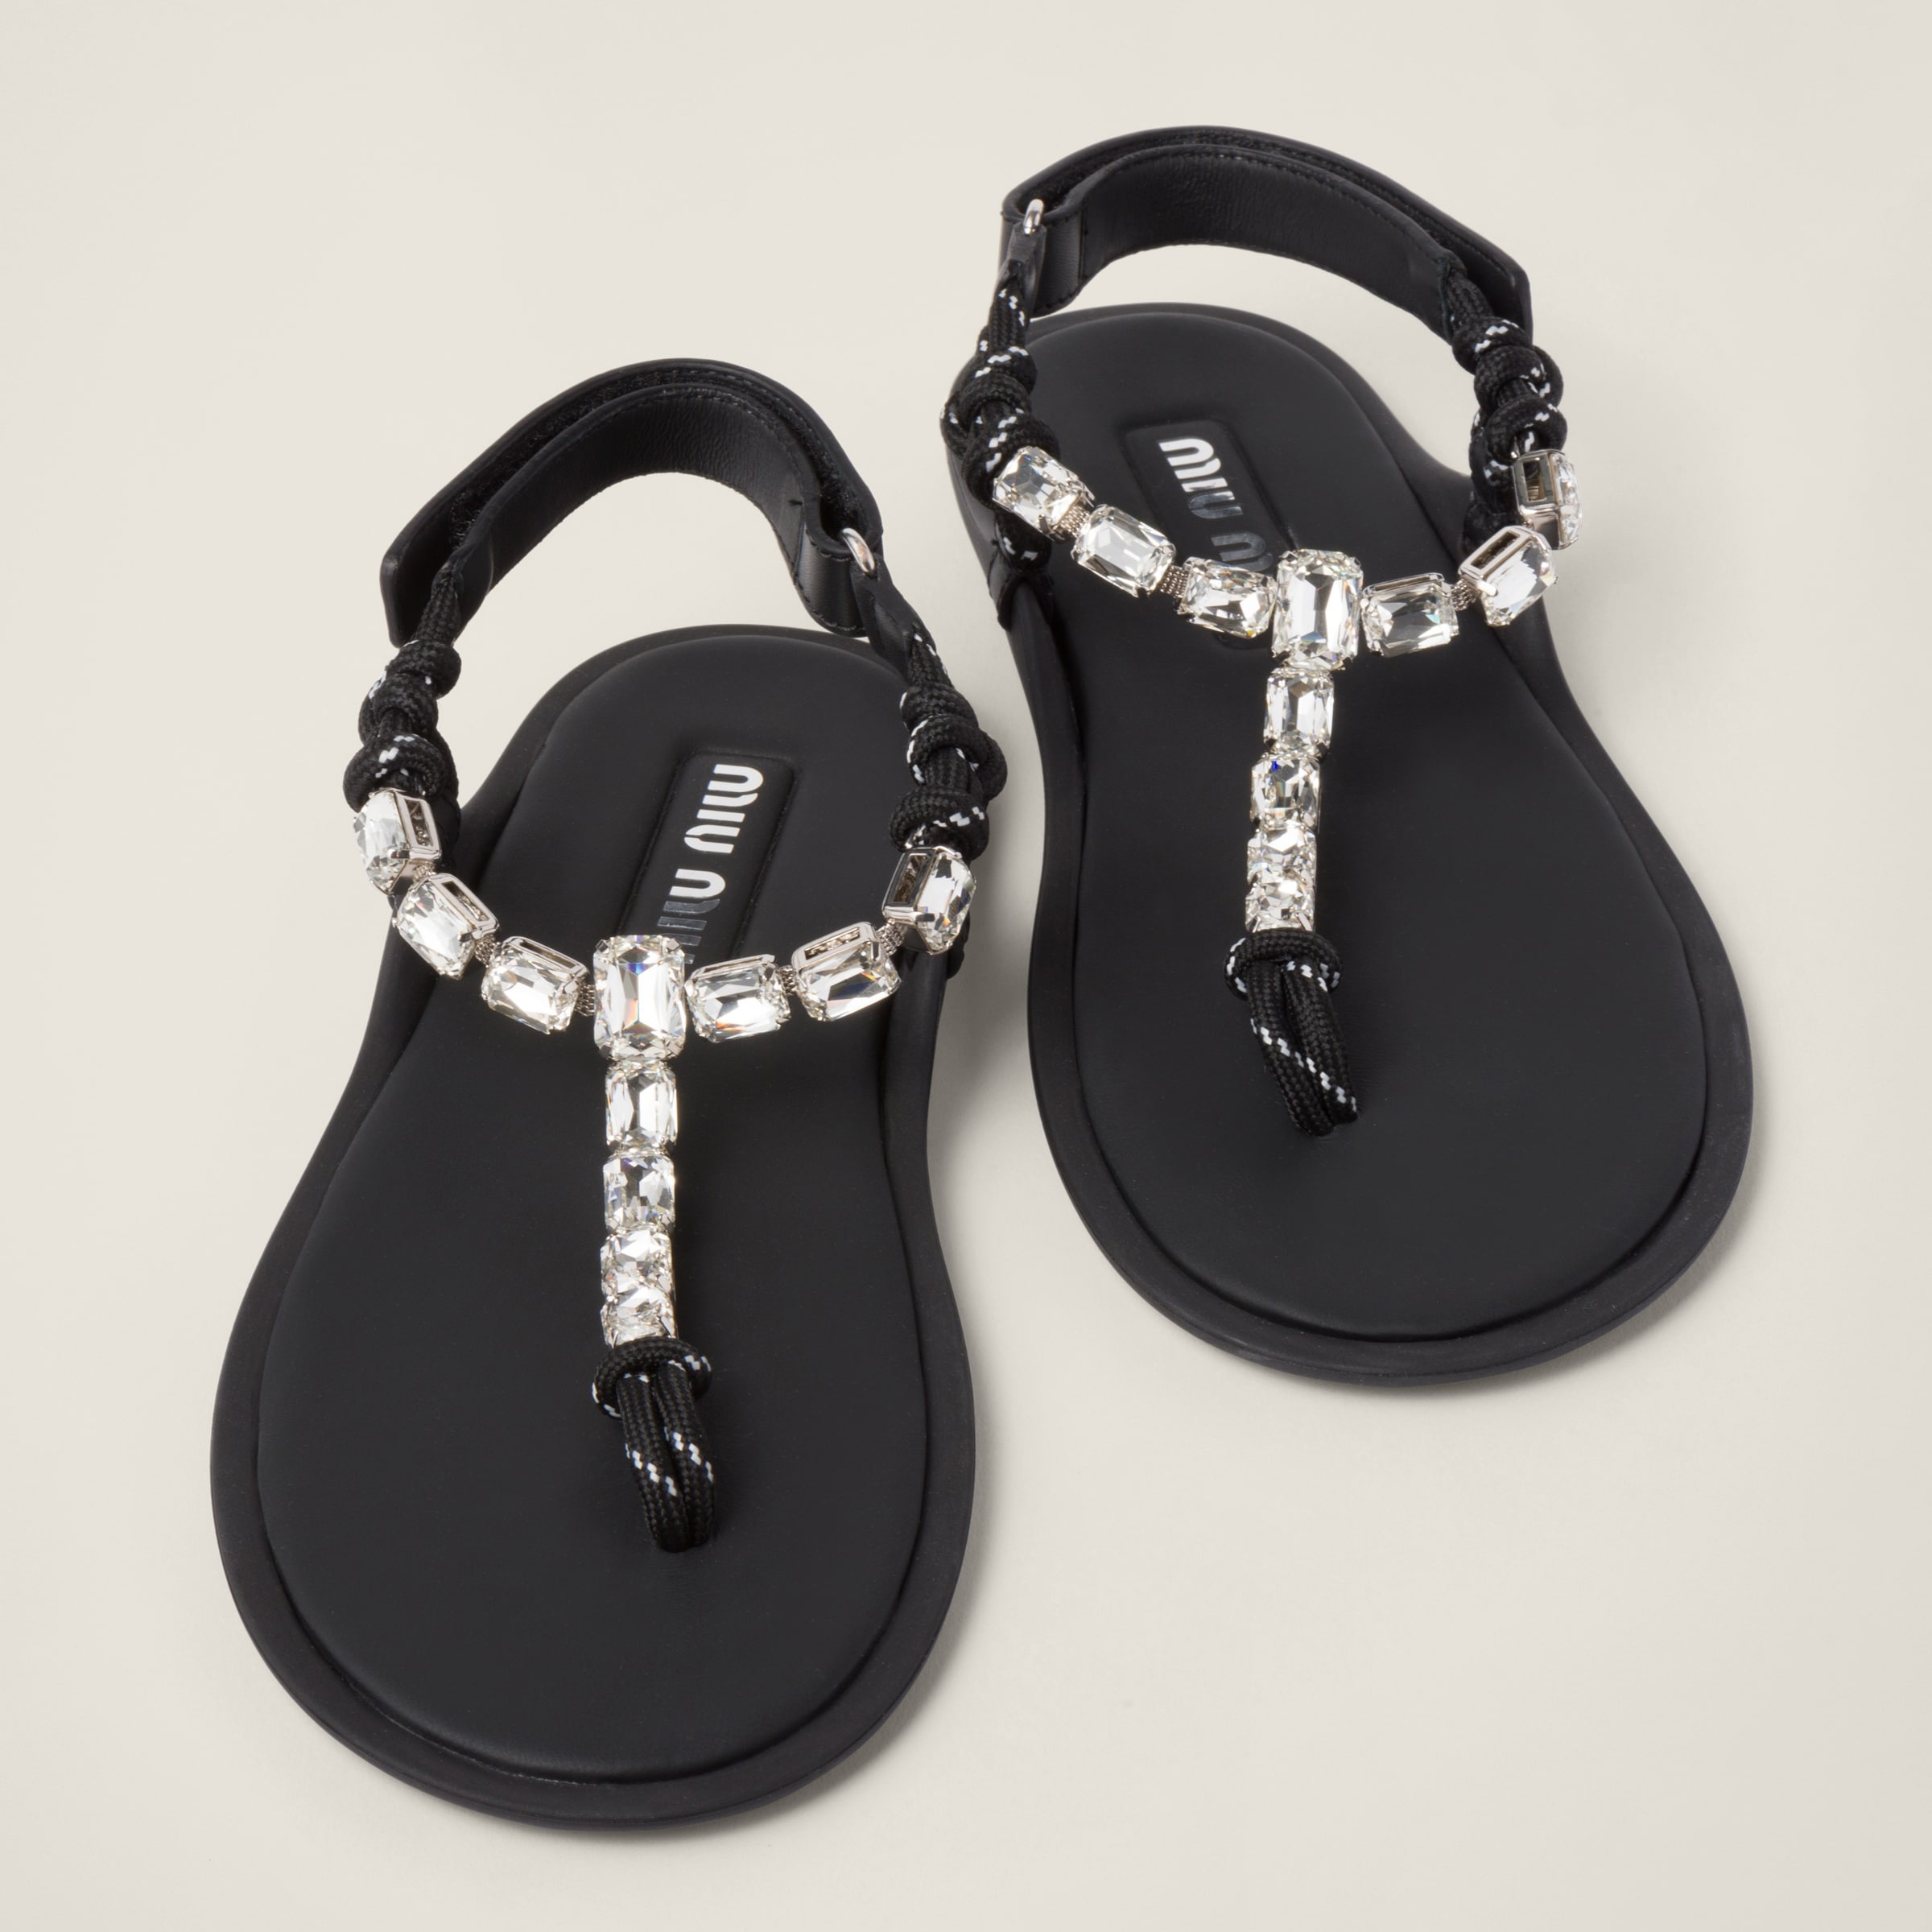 Cotton cord thong sandals - 4